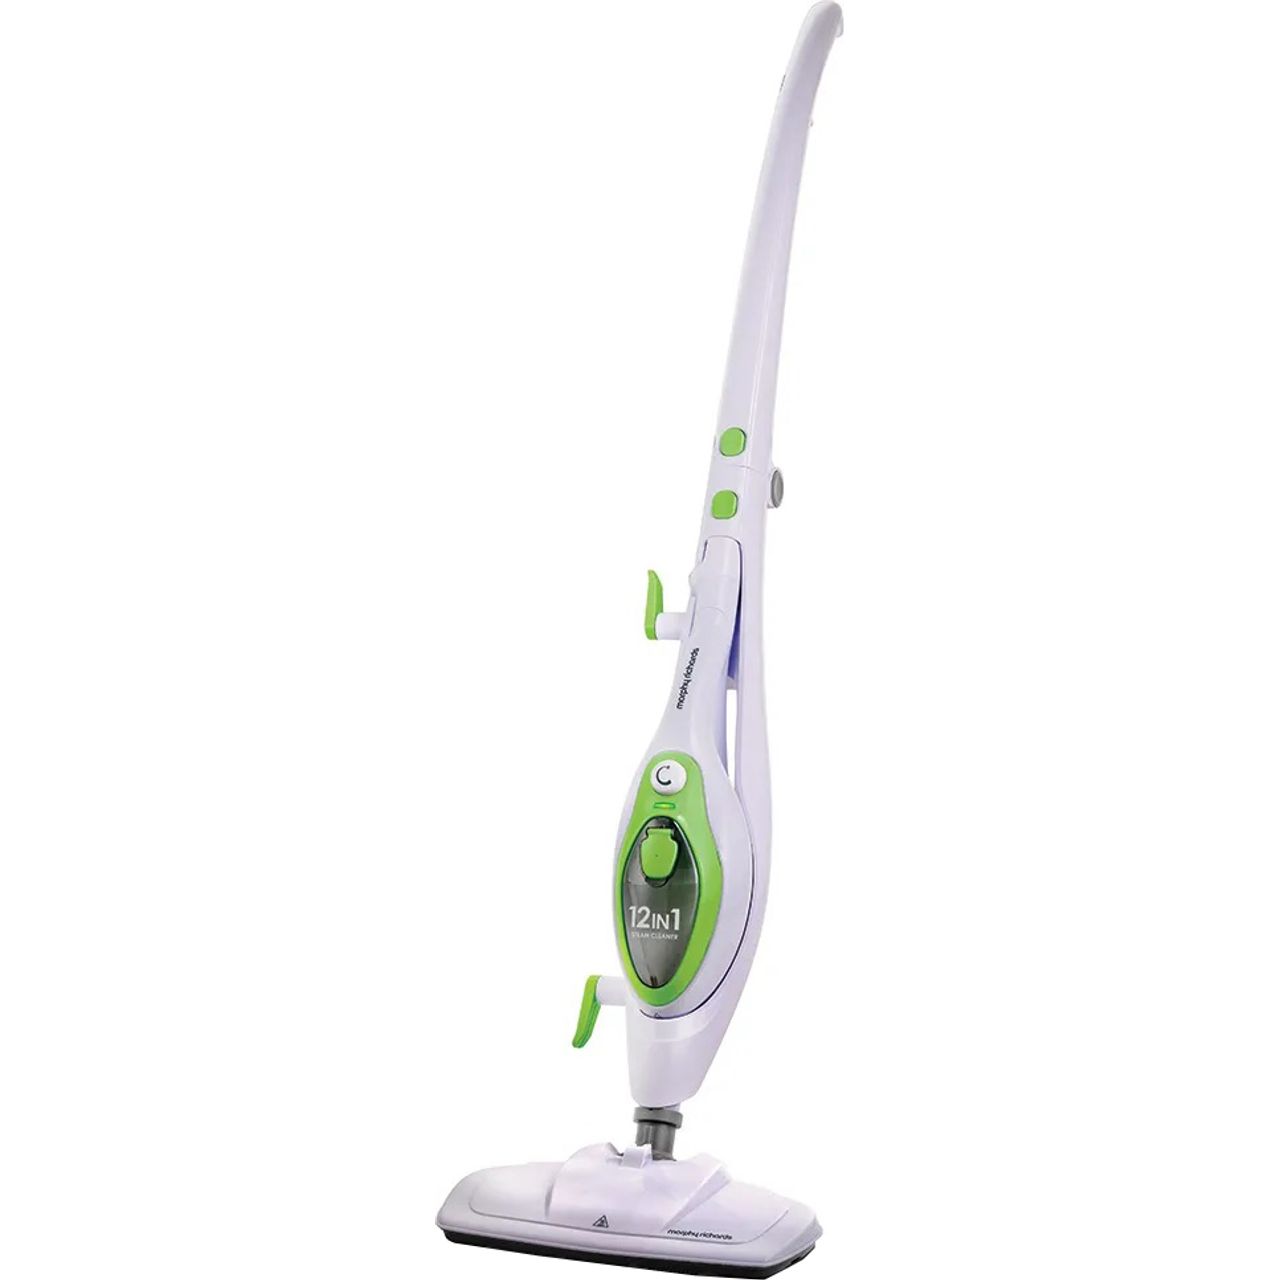 Morphy Richards 720512 Steam Cleaner Review